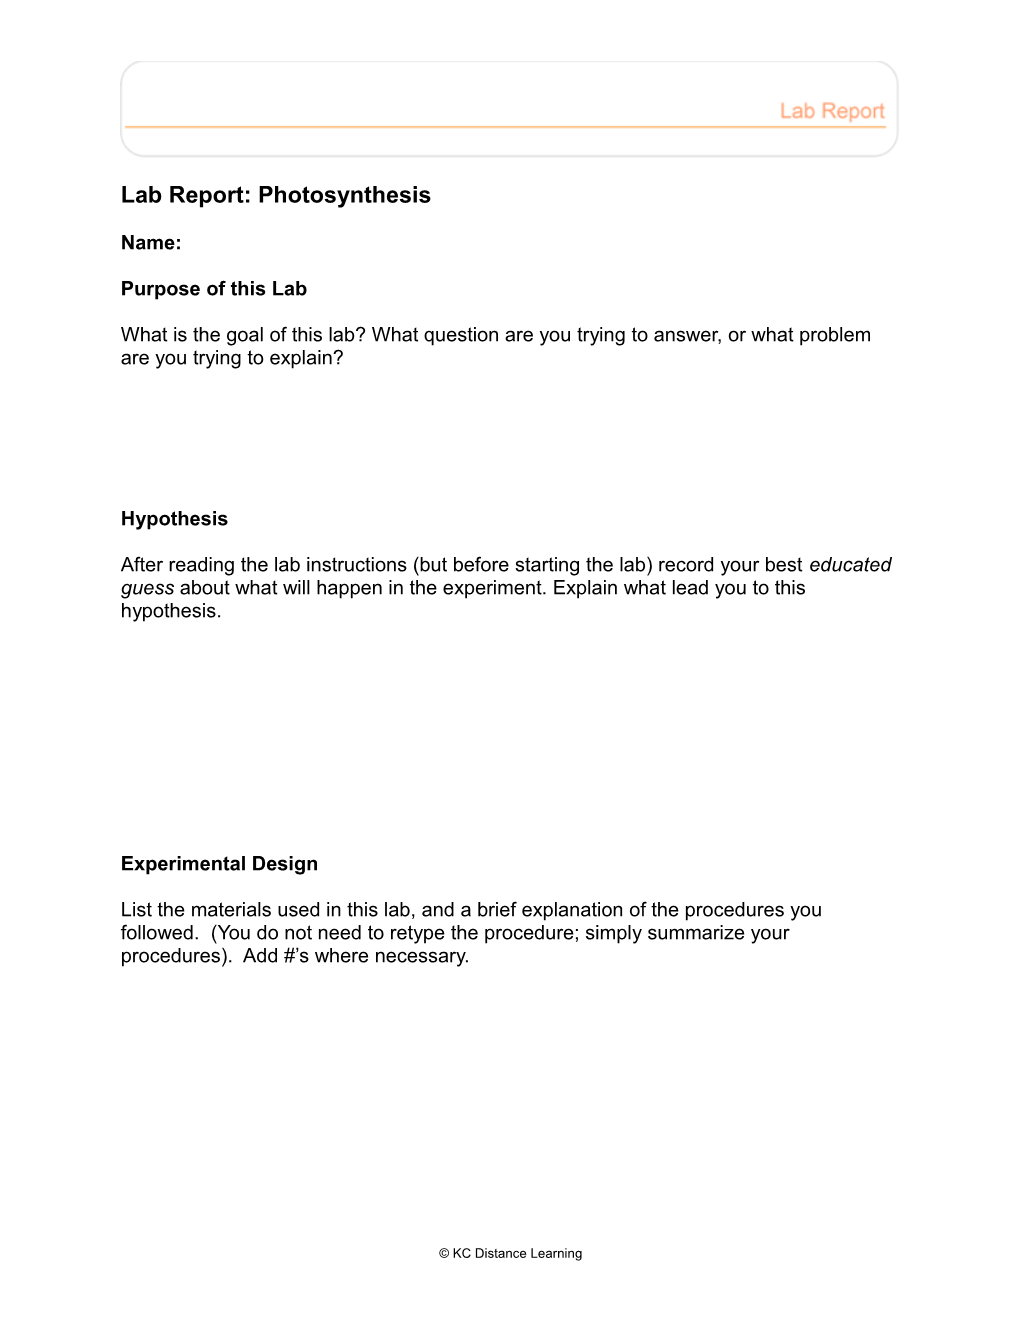 Lab Report: Photosynthesis